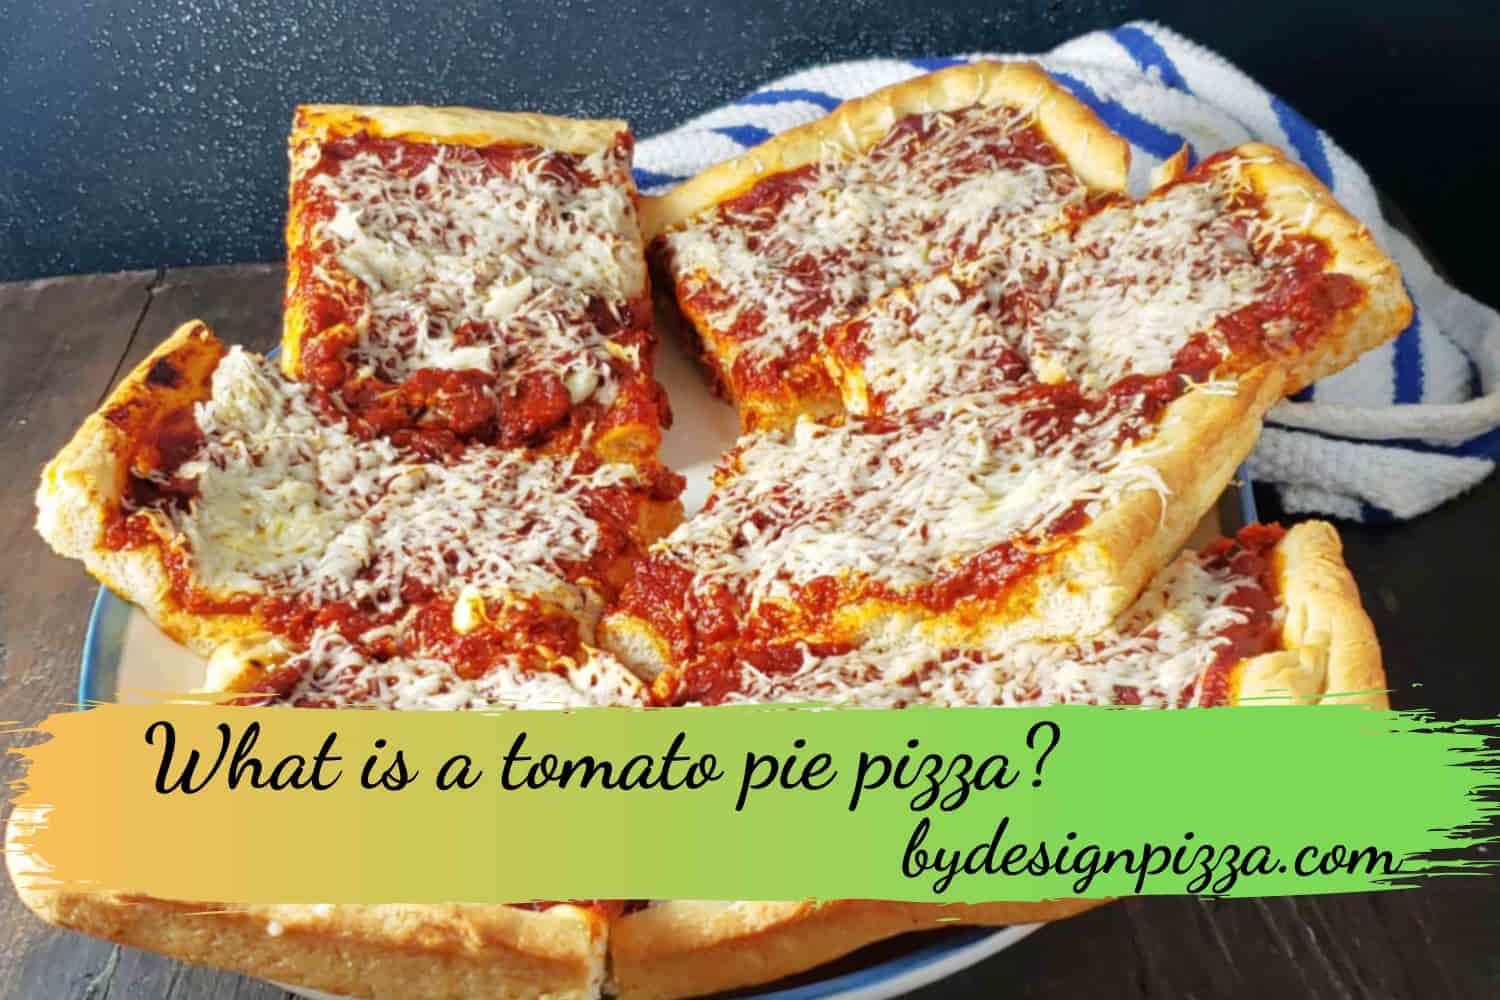 What is a tomato pie pizza?